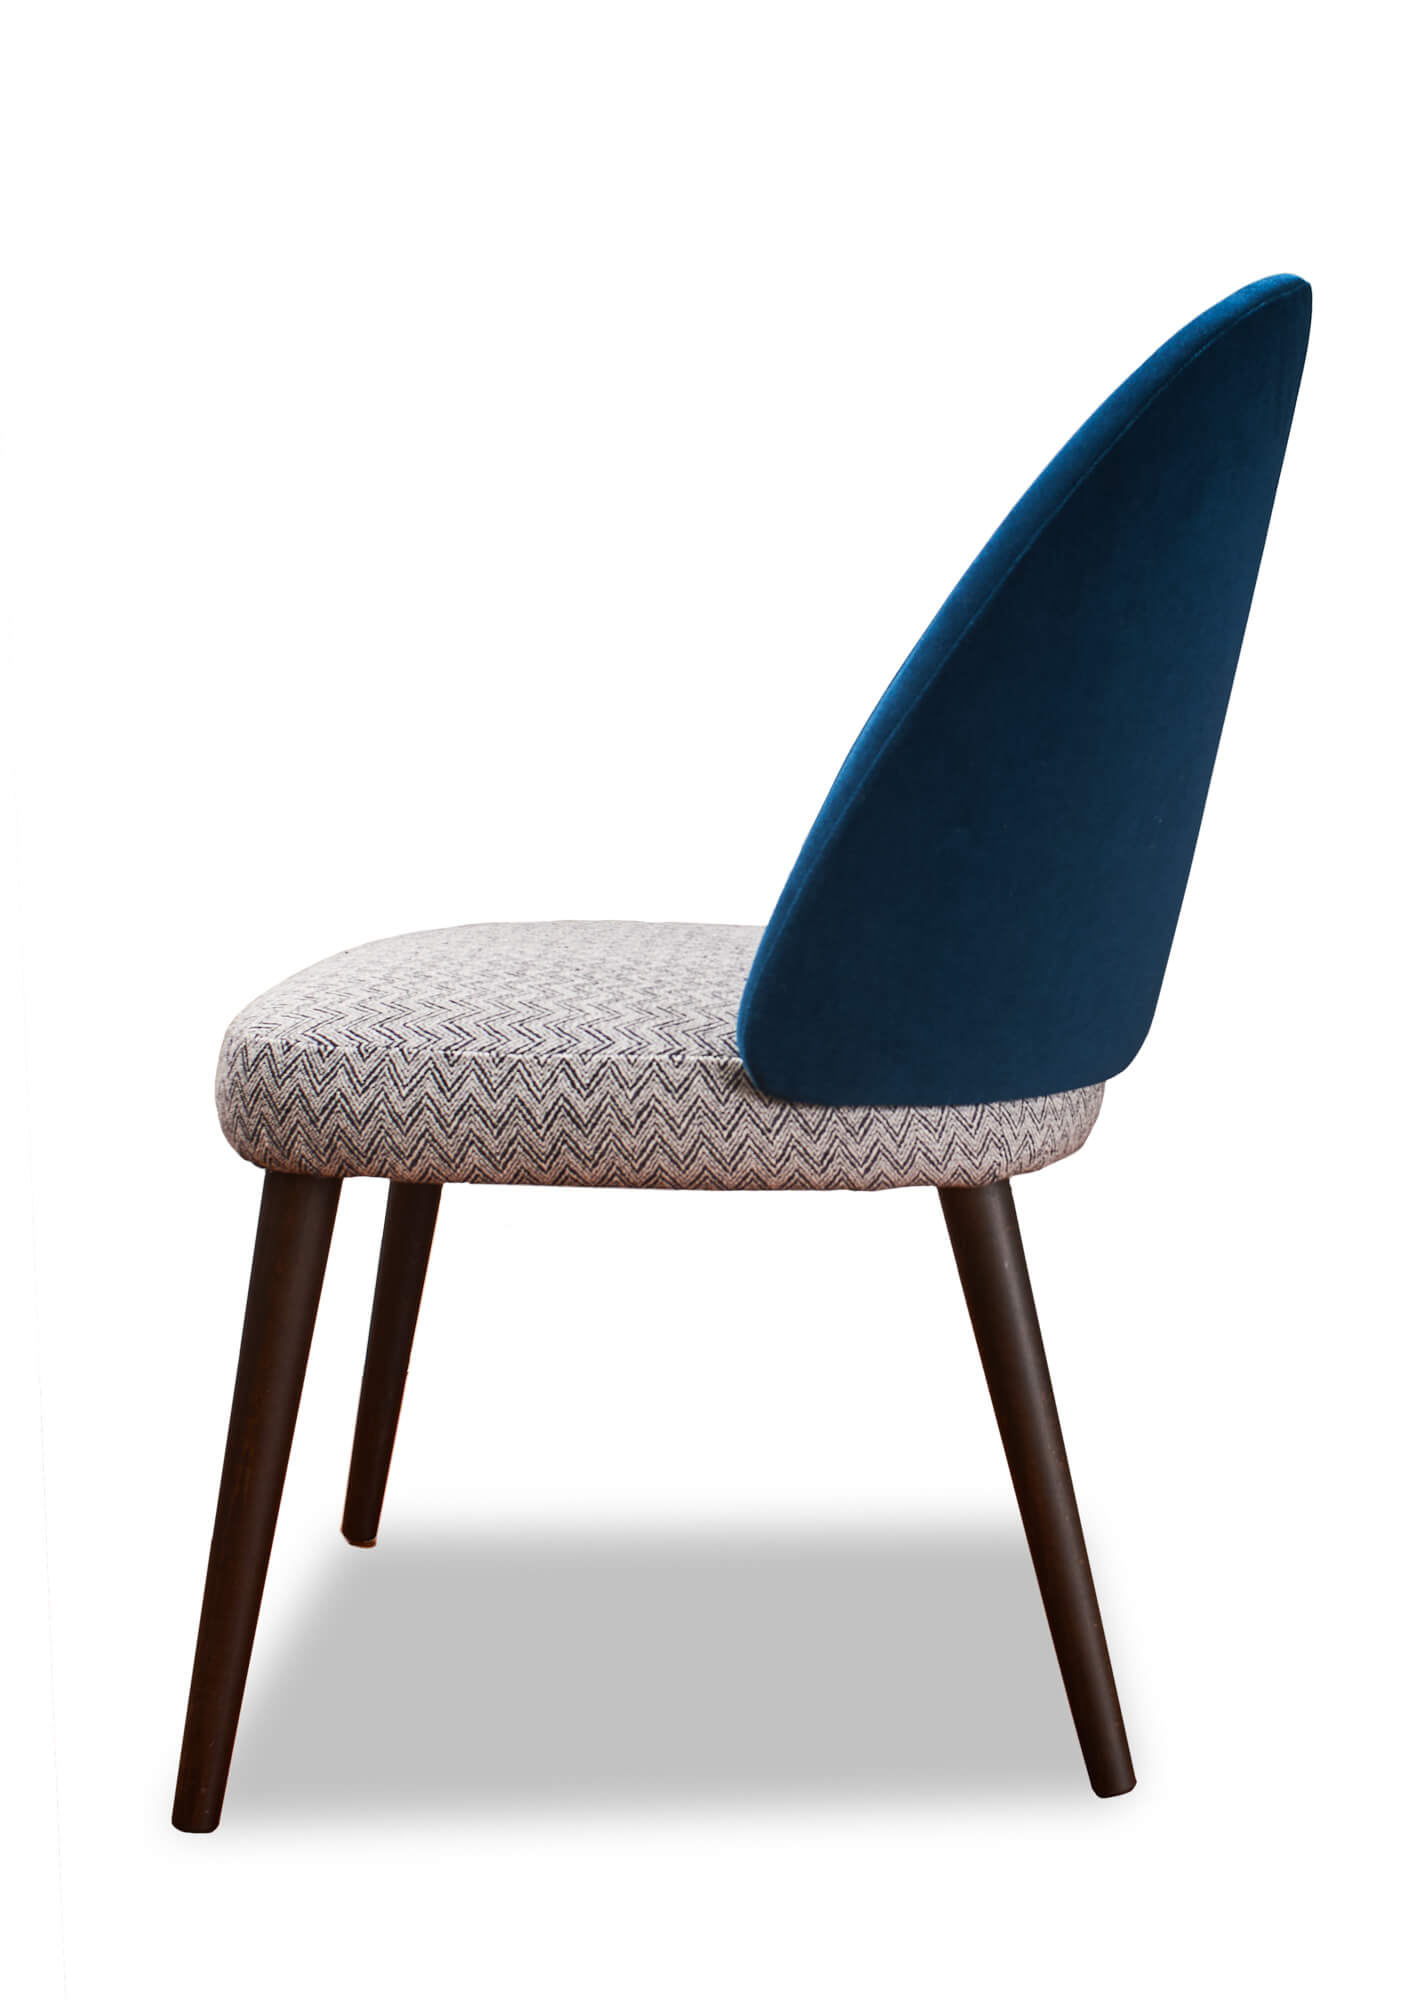 Smooth and stylish, this dining chair features a gracefully curved back and contemporary tapered legs.  Contrasting fabrics draw the eye to this attractive piece.